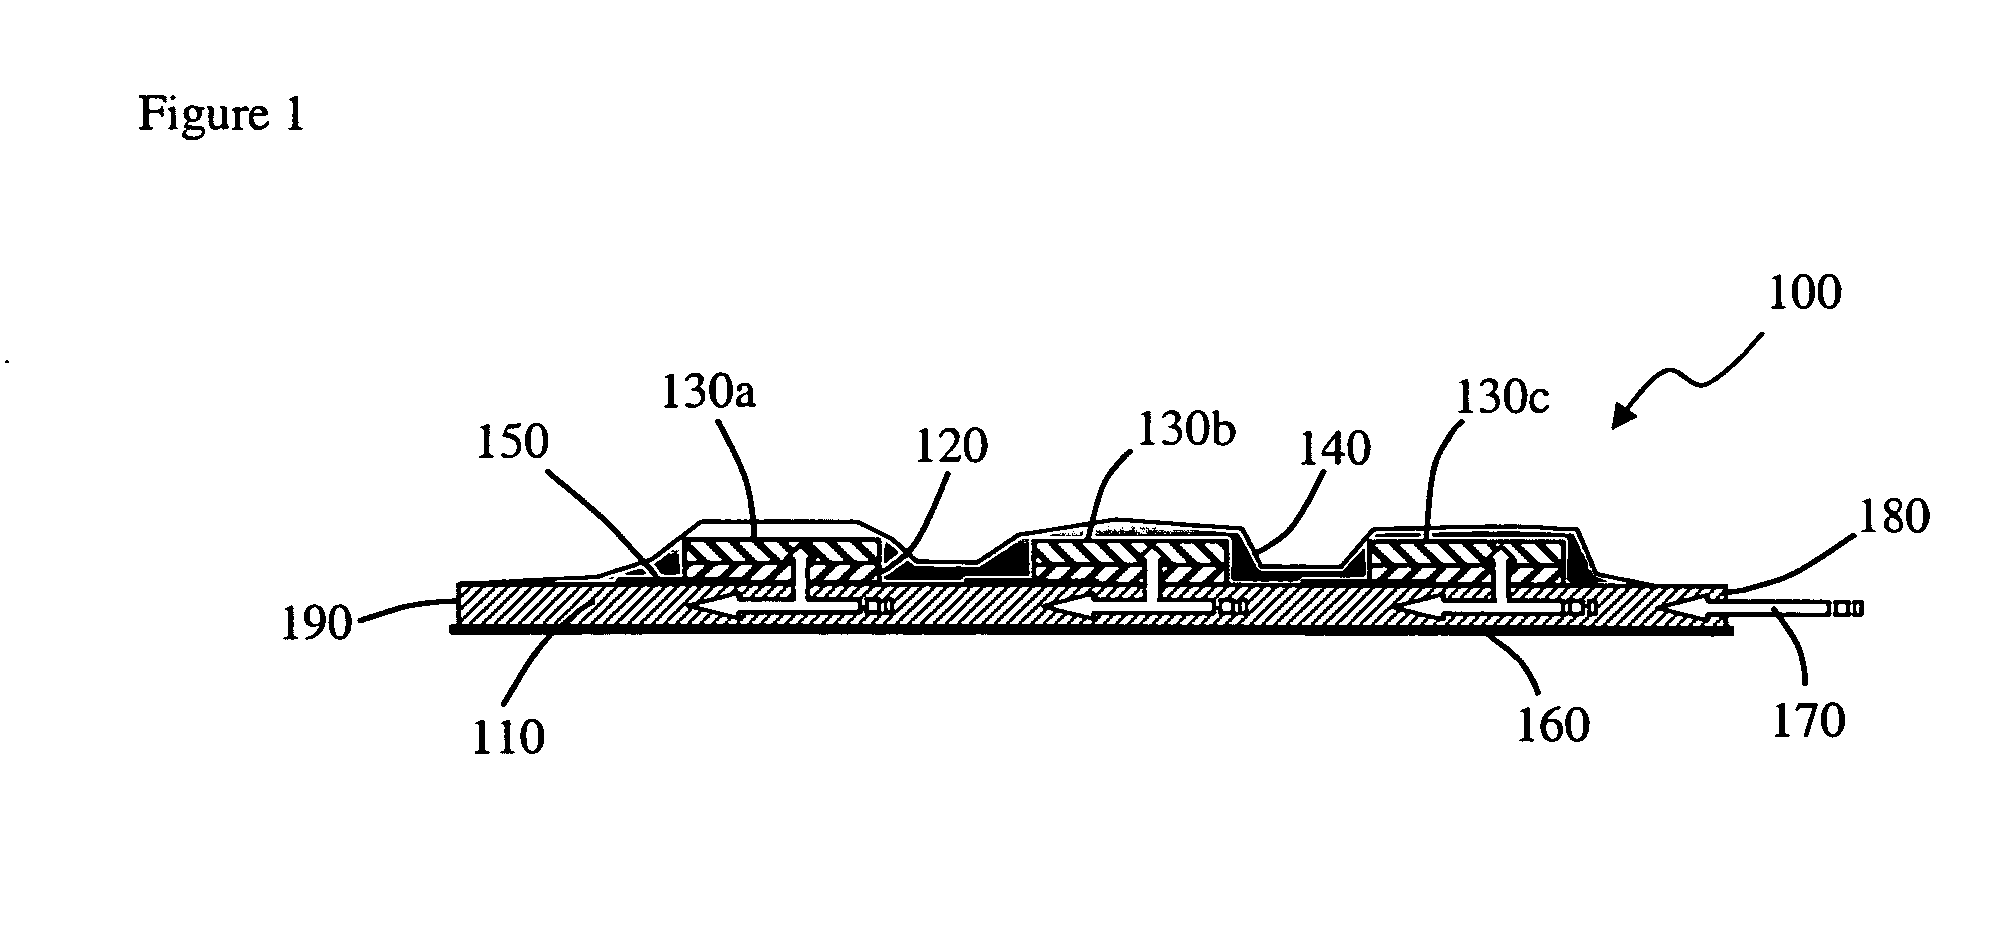 Lateral flow assay devices and methods of use